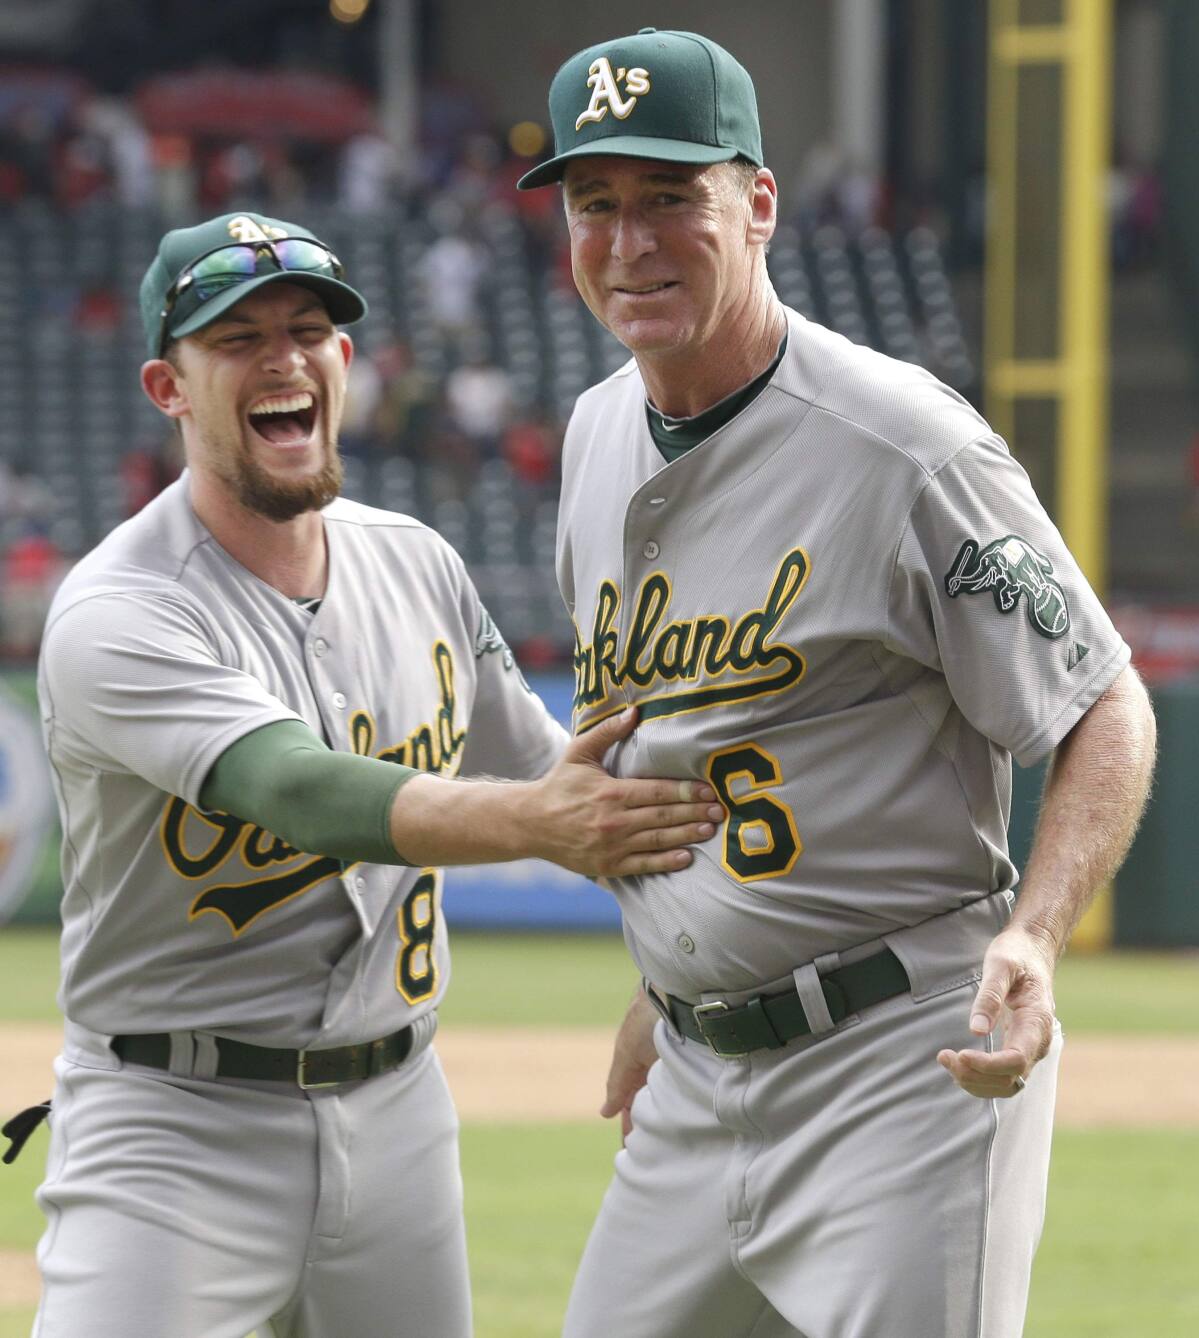 A's General Manager Billy Beane defends big moves after wild-card loss  (w/video)